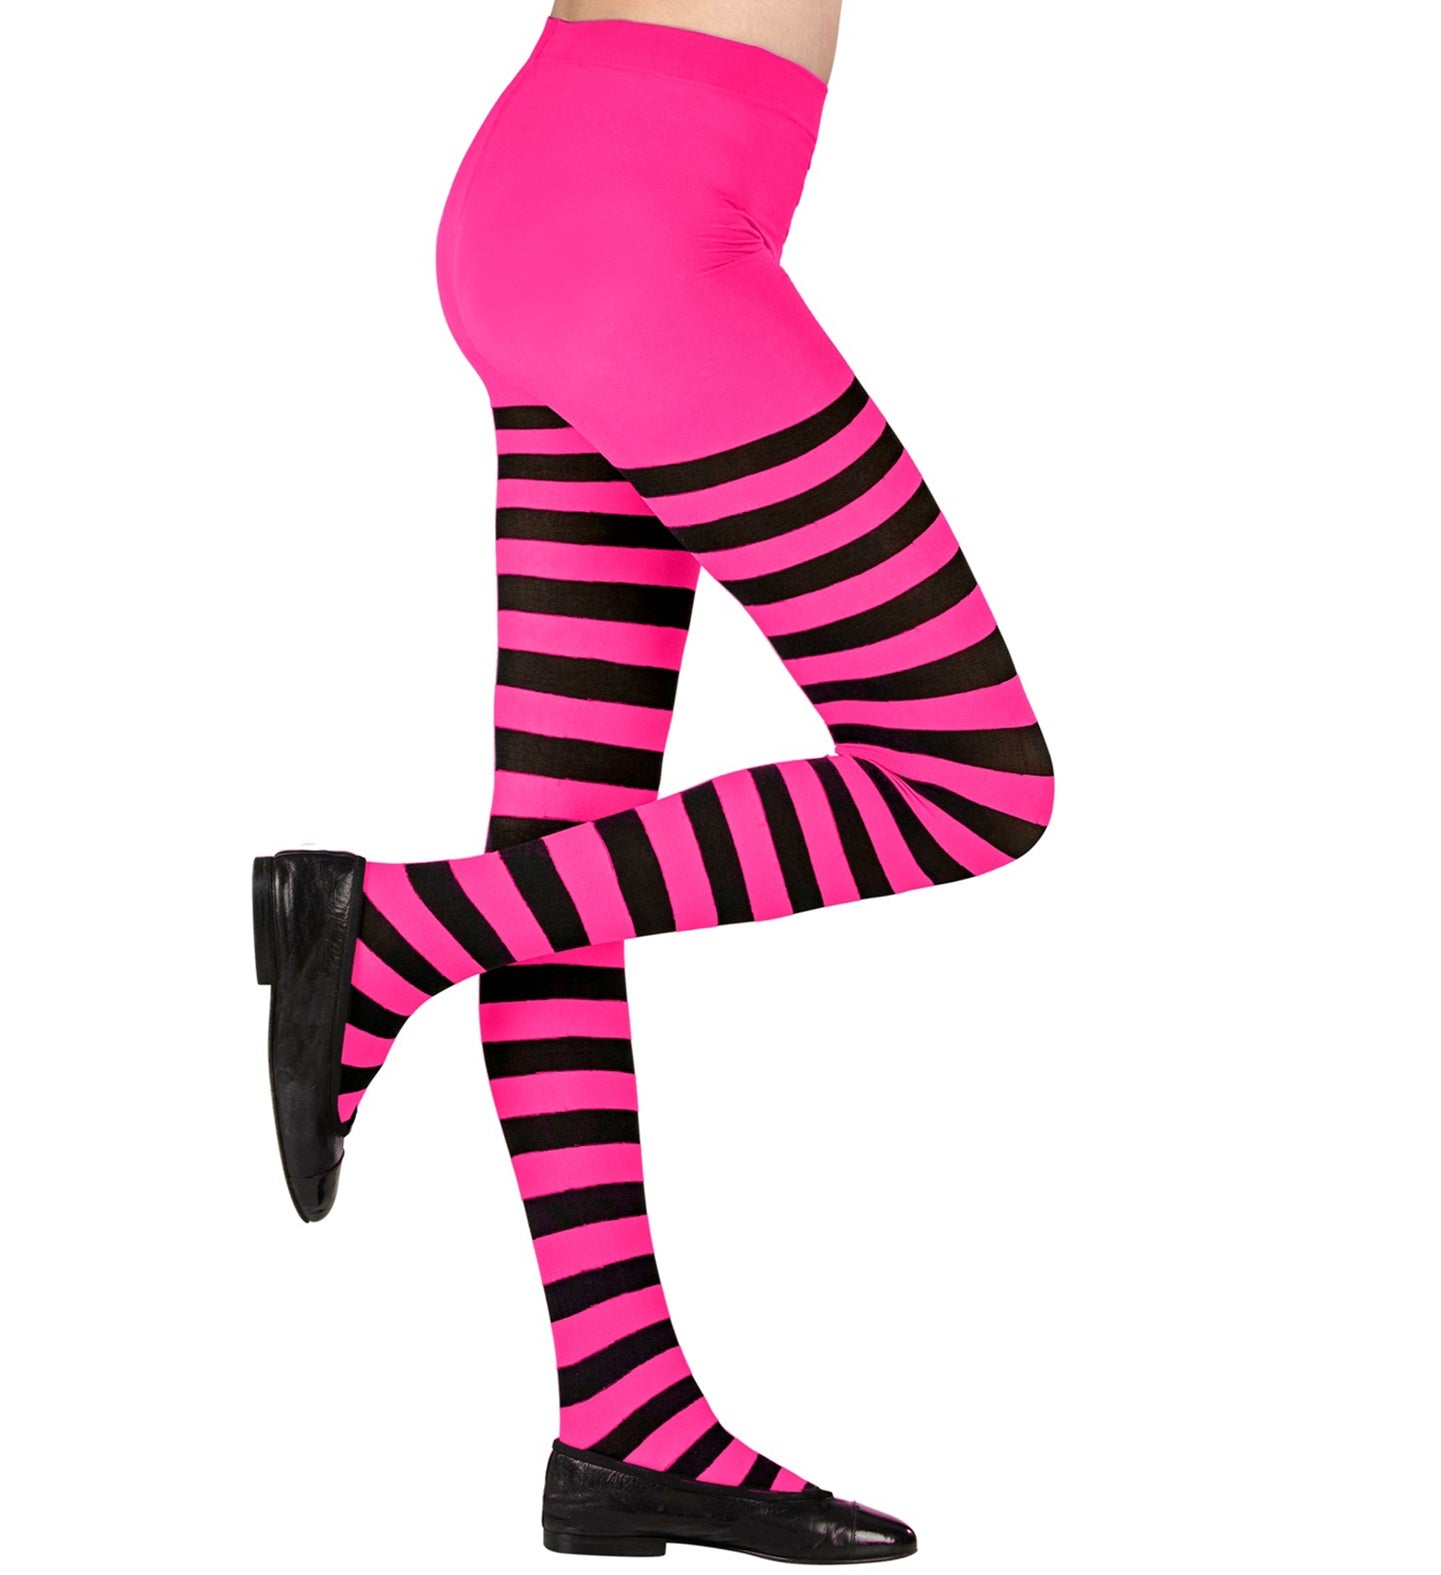 Children's Pink and Black Striped stockings